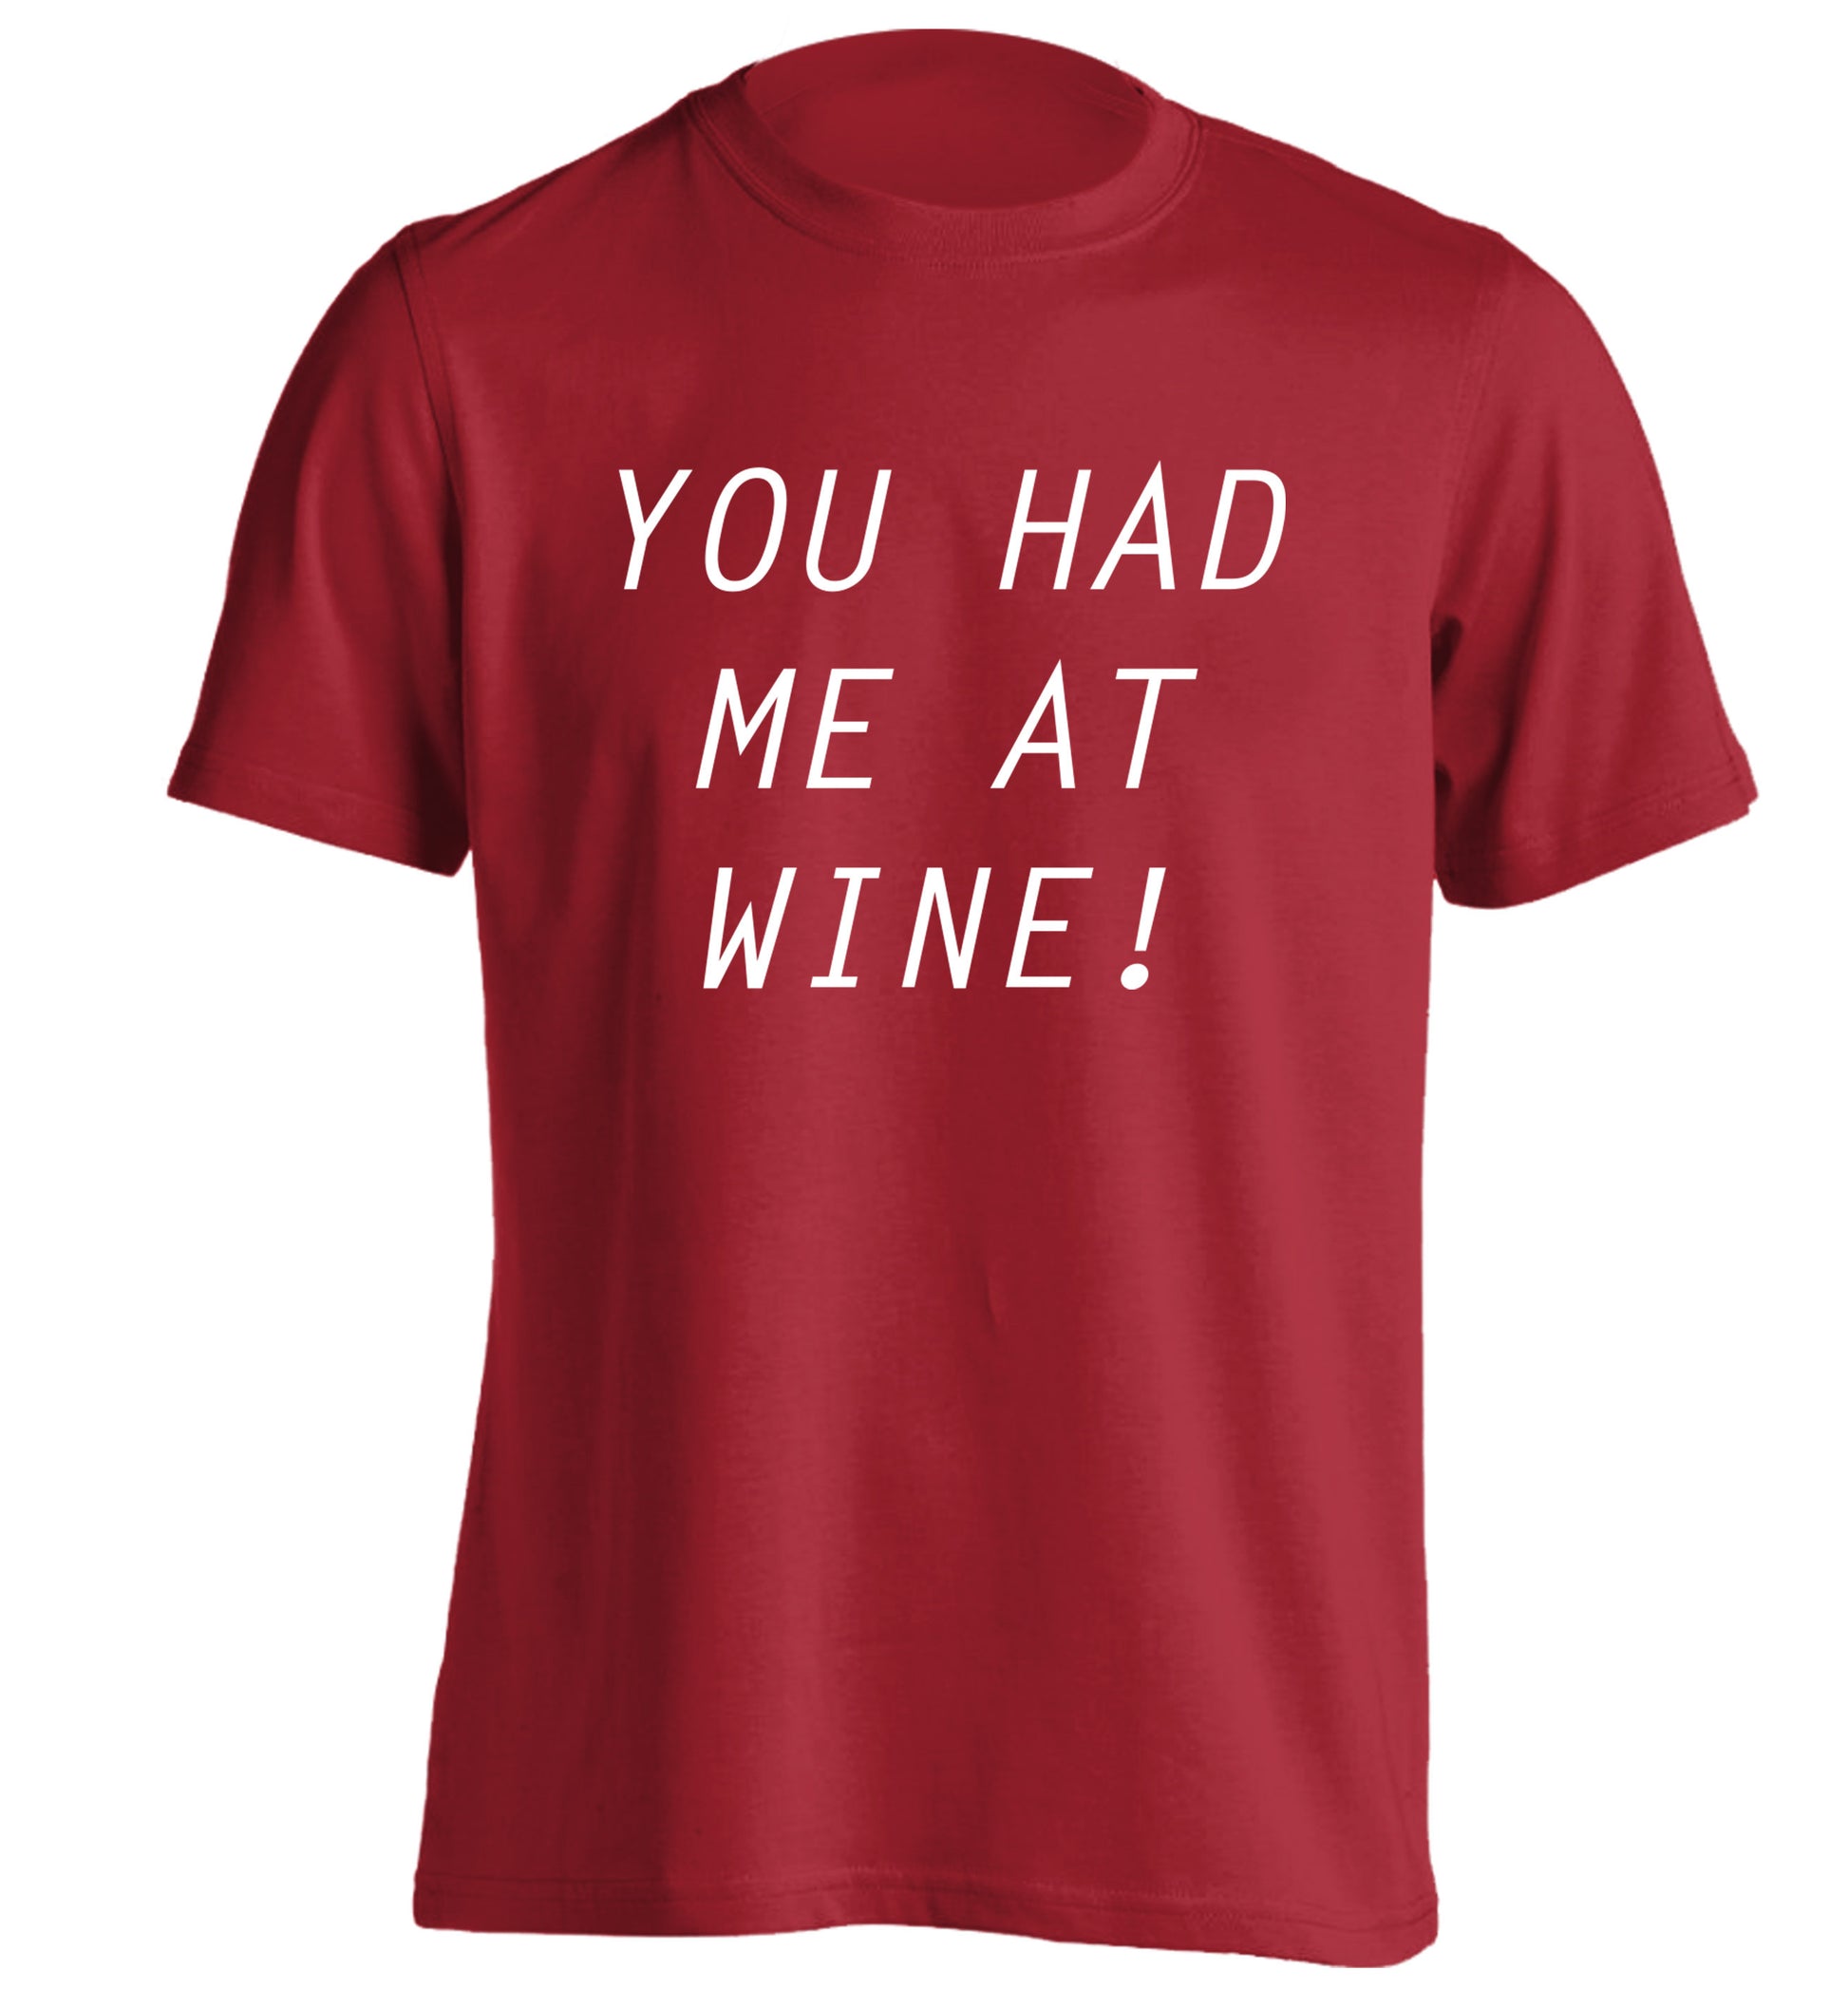 You had me at wine adults unisex red Tshirt 2XL